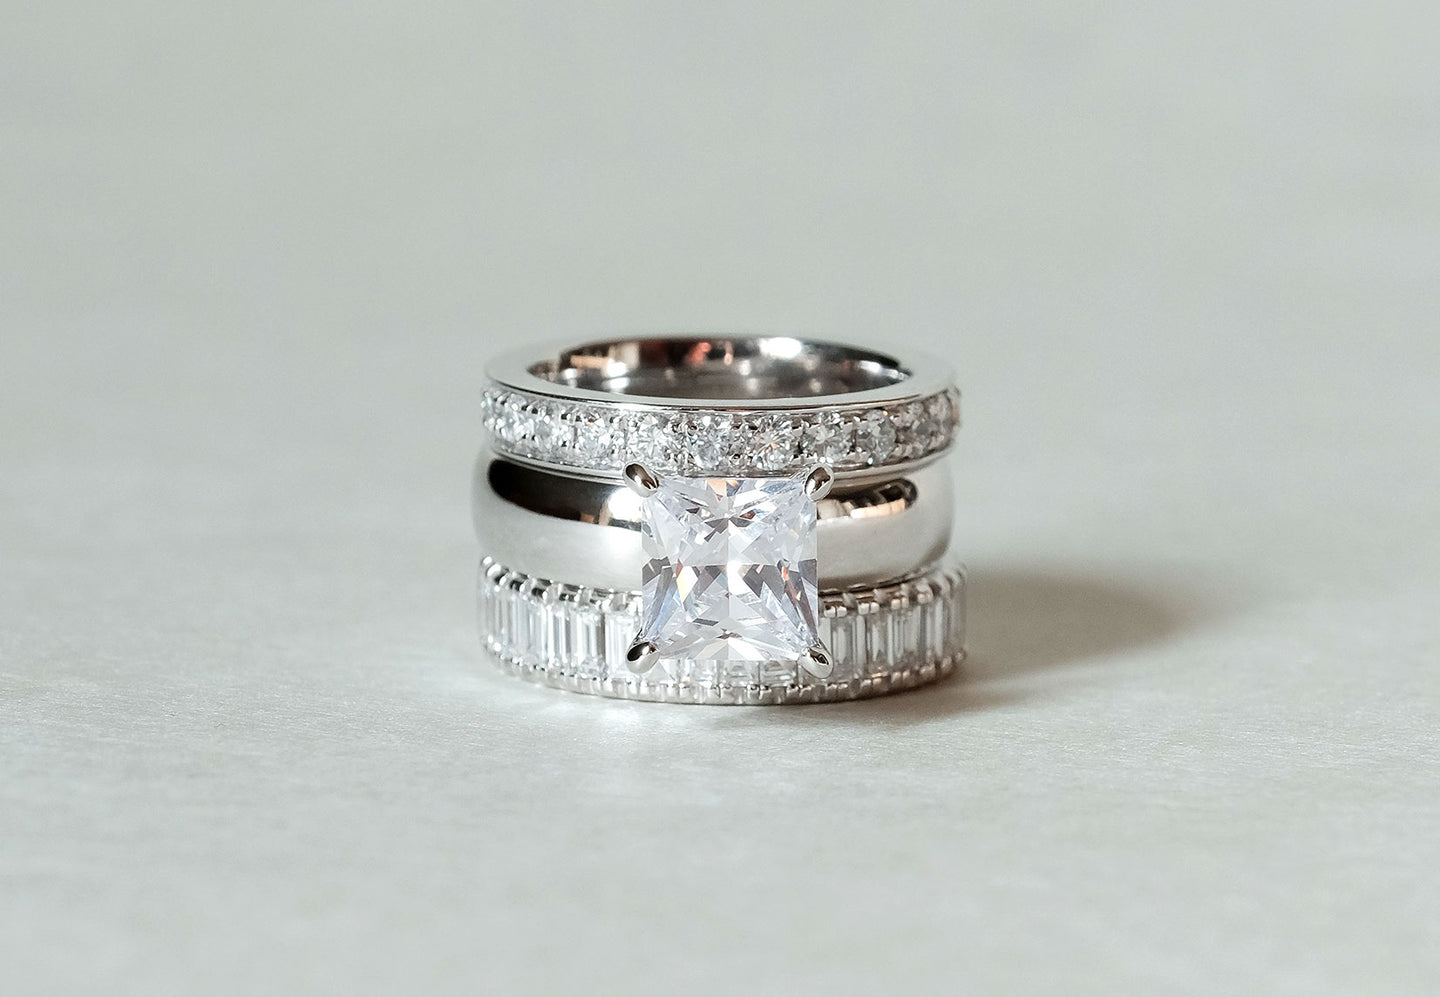 Top to bottom: The Channel Eternity, The Domed Solitaire with a Princess Diamond, and The Column Baguette rings stacked